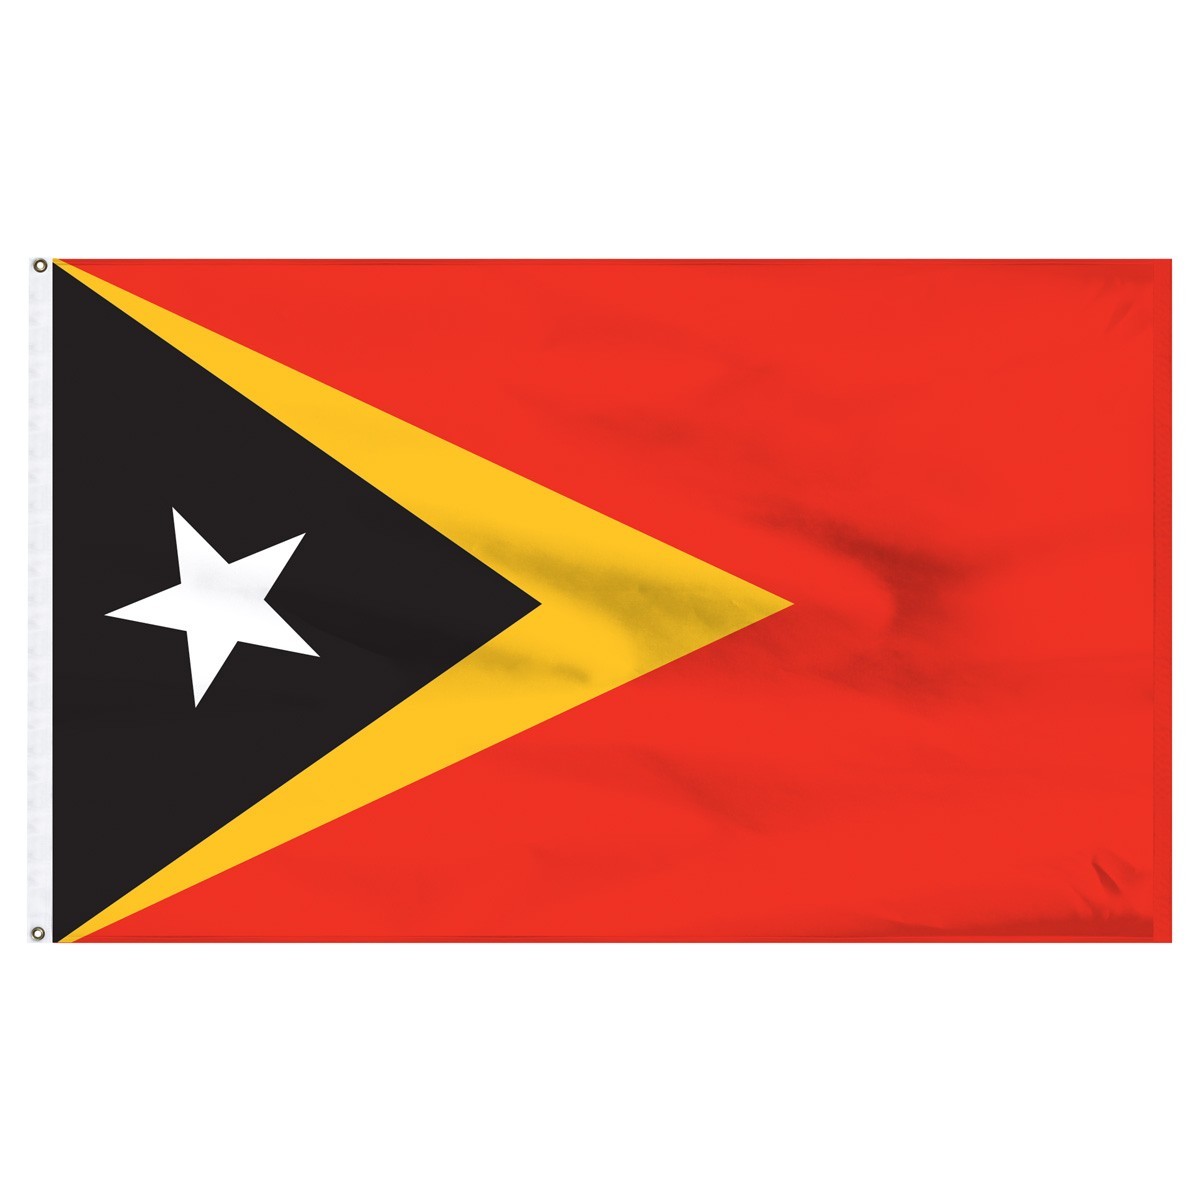 East Timor flags for sale